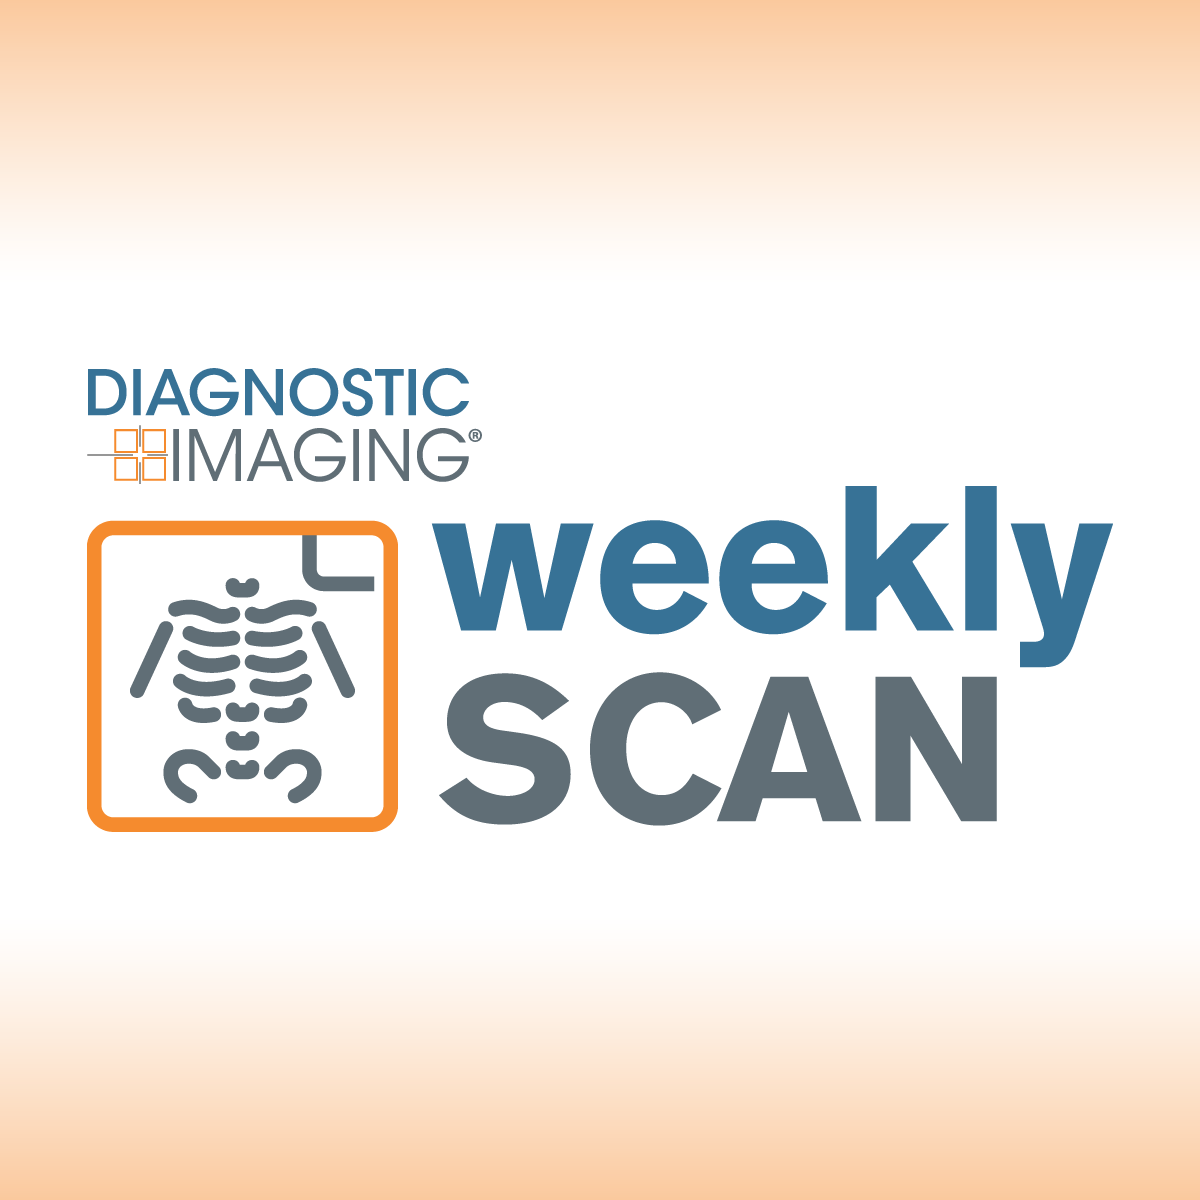 Diagnostic Imaging's Weekly Scan: July 2-July 8